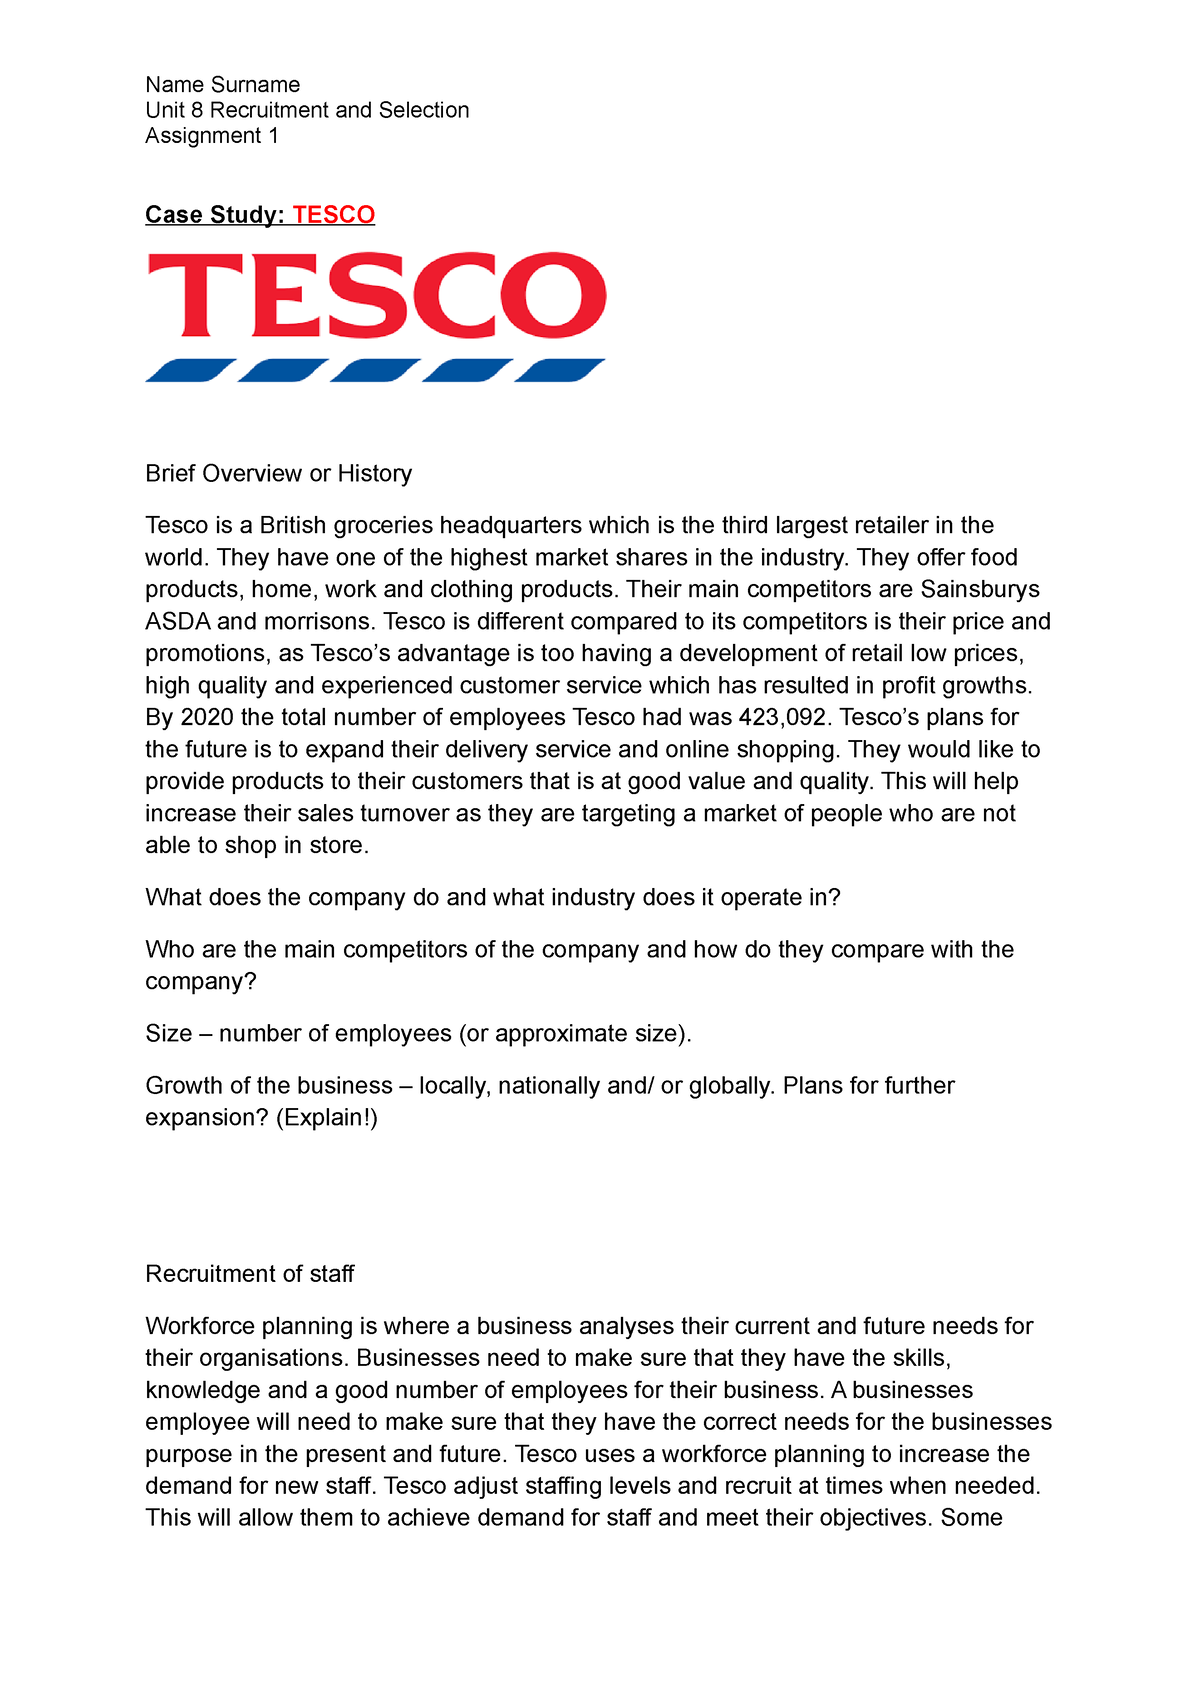 unit 8 recruitment and selection process assignment 1 tesco